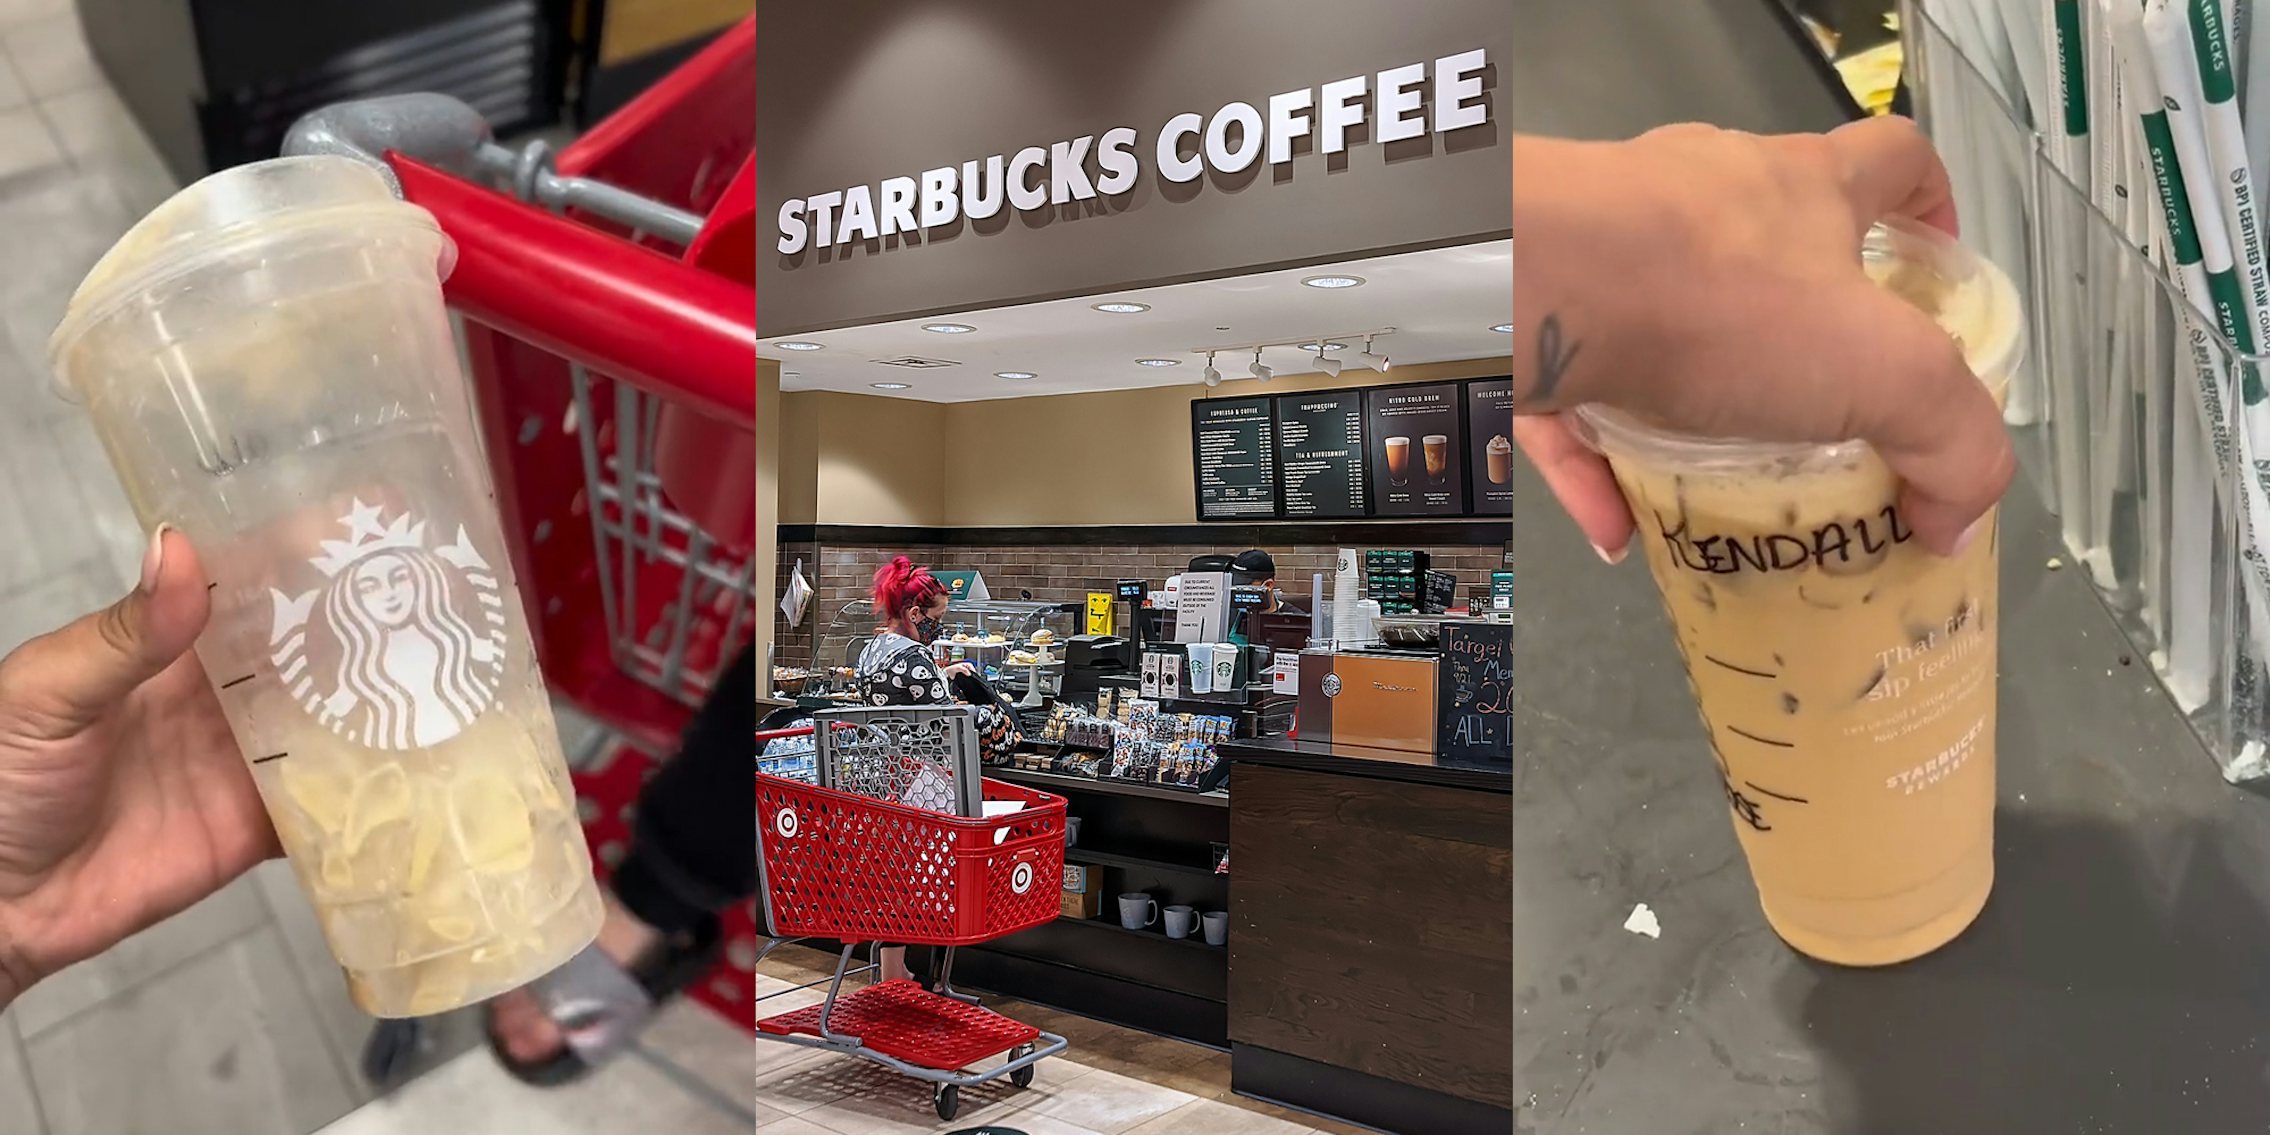 Starbucks cup almost empty in hand (l) Starbucks Coffee inside Target with Target cart (c) Starbucks customer holding refilled drink' (r)